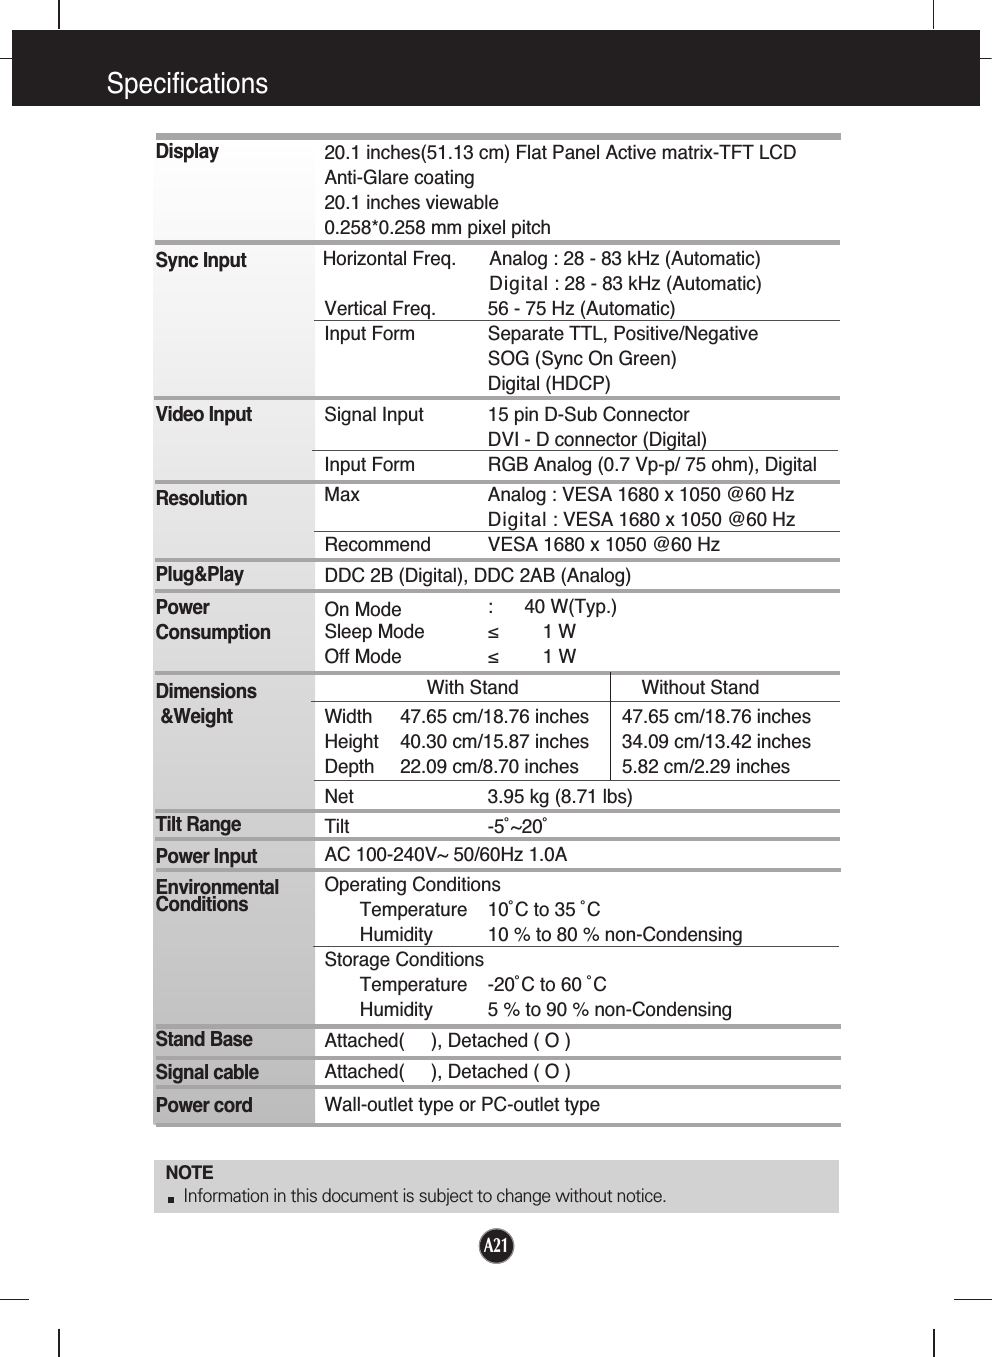 A21A21A21Specifications NOTEInformation in this document is subject to change without notice.DisplaySync InputVideo InputResolutionPlug&amp;PlayPowerConsumptionDimensions&amp;WeightTilt RangePower InputEnvironmentalConditionsStand BaseSignal cablePower cord 20.1 inches(51.13 cm) Flat Panel Active matrix-TFT LCD Anti-Glare coating20.1 inches viewable0.258*0.258 mm pixel pitchHorizontal Freq. Analog : 28 - 83 kHz (Automatic)Digital : 28 - 83 kHz (Automatic)Vertical Freq. 56 - 75 Hz (Automatic)Input Form Separate TTL, Positive/NegativeSOG (Sync On Green) Digital (HDCP)Signal Input 15 pin D-Sub ConnectorDVI - D connector (Digital)Input Form RGB Analog (0.7 Vp-p/ 75 ohm), DigitalMax Analog : VESA 1680 x 1050 @60 HzDigital : VESA 1680 x 1050 @60 HzRecommend VESA 1680 x 1050 @60 HzDDC 2B (Digital), DDC 2AB (Analog)On Mode : 40 W(Typ.)Sleep Mode ≤ 1 WOff Mode ≤ 1 WWith Stand Without StandWidth 47.65 cm/18.76 inches 47.65 cm/18.76 inchesHeight 40.30 cm/15.87 inches 34.09 cm/13.42 inchesDepth 22.09 cm/8.70 inches 5.82 cm/2.29 inchesNet 3.95 kg (8.71 lbs)Tilt -5˚~20˚AC 100-240V~ 50/60Hz 1.0A Operating ConditionsTemperature 10˚C to 35 ˚CHumidity 10 % to 80 % non-CondensingStorage ConditionsTemperature -20˚C to 60 ˚CHumidity 5 % to 90 % non-CondensingAttached(     ), Detached ( O )Attached(     ), Detached ( O )Wall-outlet type or PC-outlet type